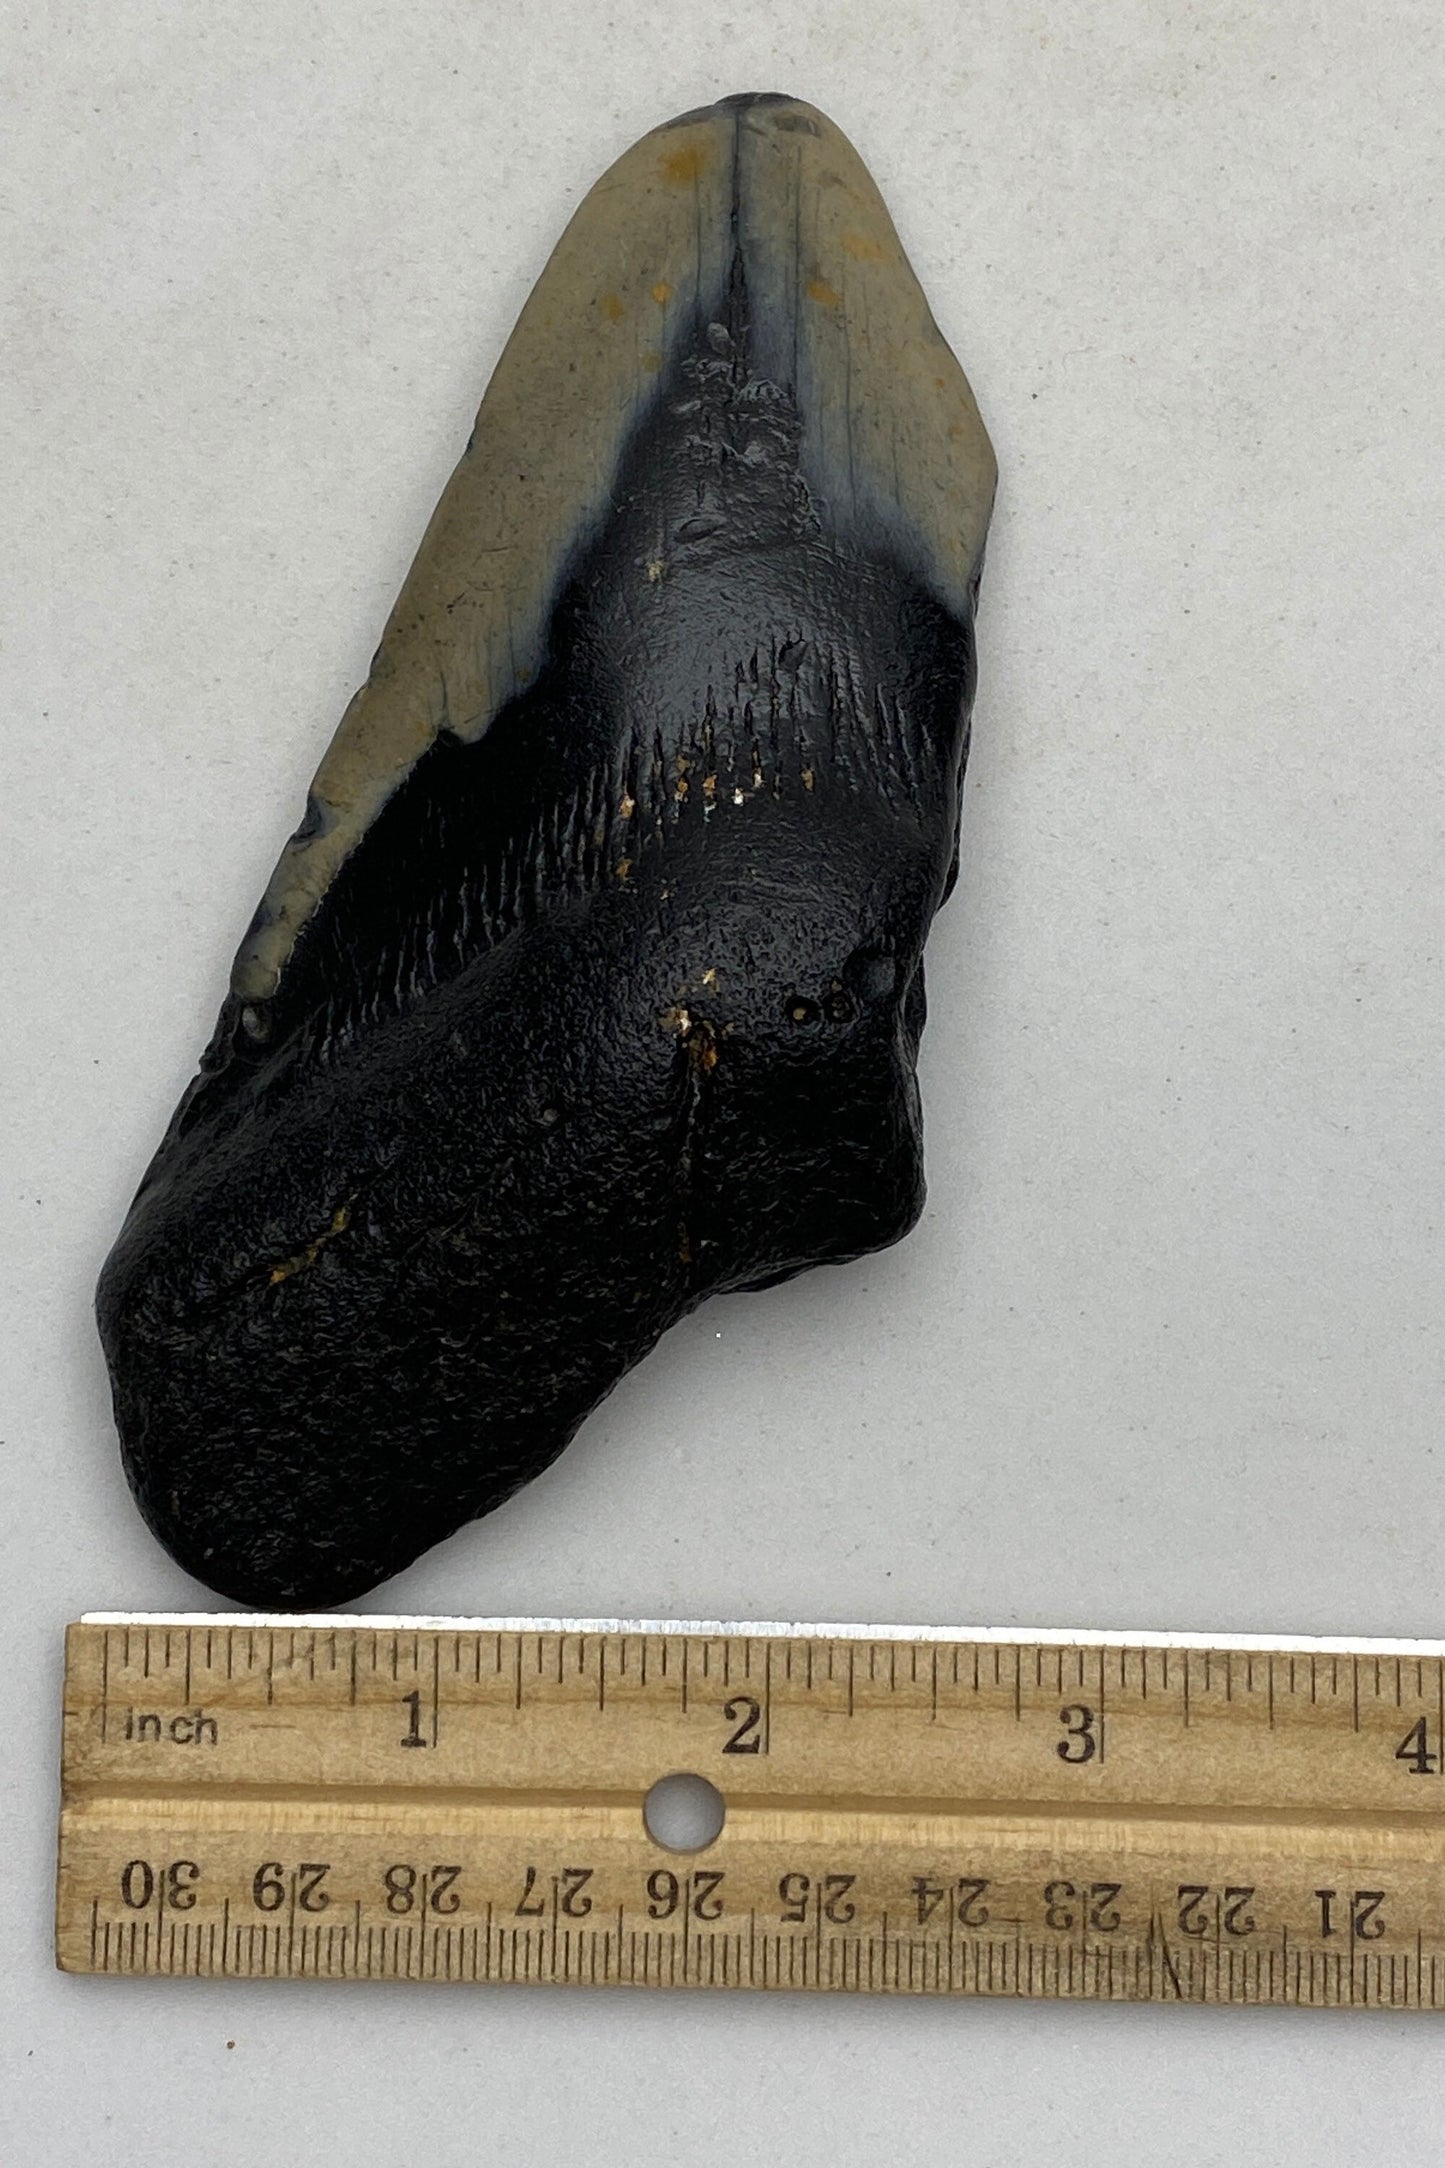 Real Fossil Megalodon Tooth, 4.75 inches long